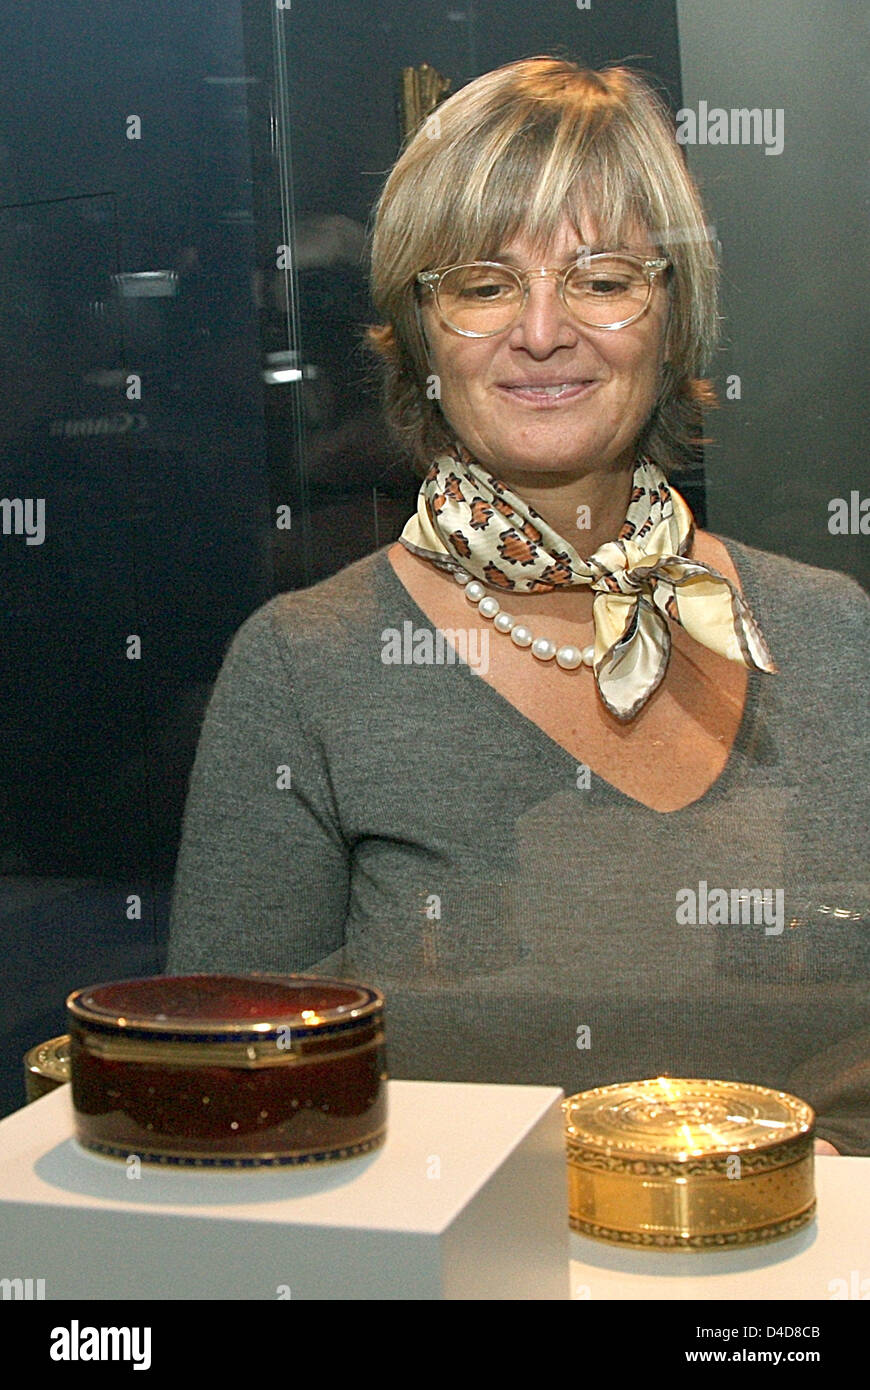 Princess Gloria von Thurn und Taxis looks at golden tins from the 18th century at an exhibition at the 'Nationalmuseum' in Munich, Germany, 1 April 2008. The special exhibition 'Galante Preziosen des Fuersten von Thurn und Taxis' features former 'Thurn und Taxis' family jewellery. Photo: Ursula Dueren Stock Photo